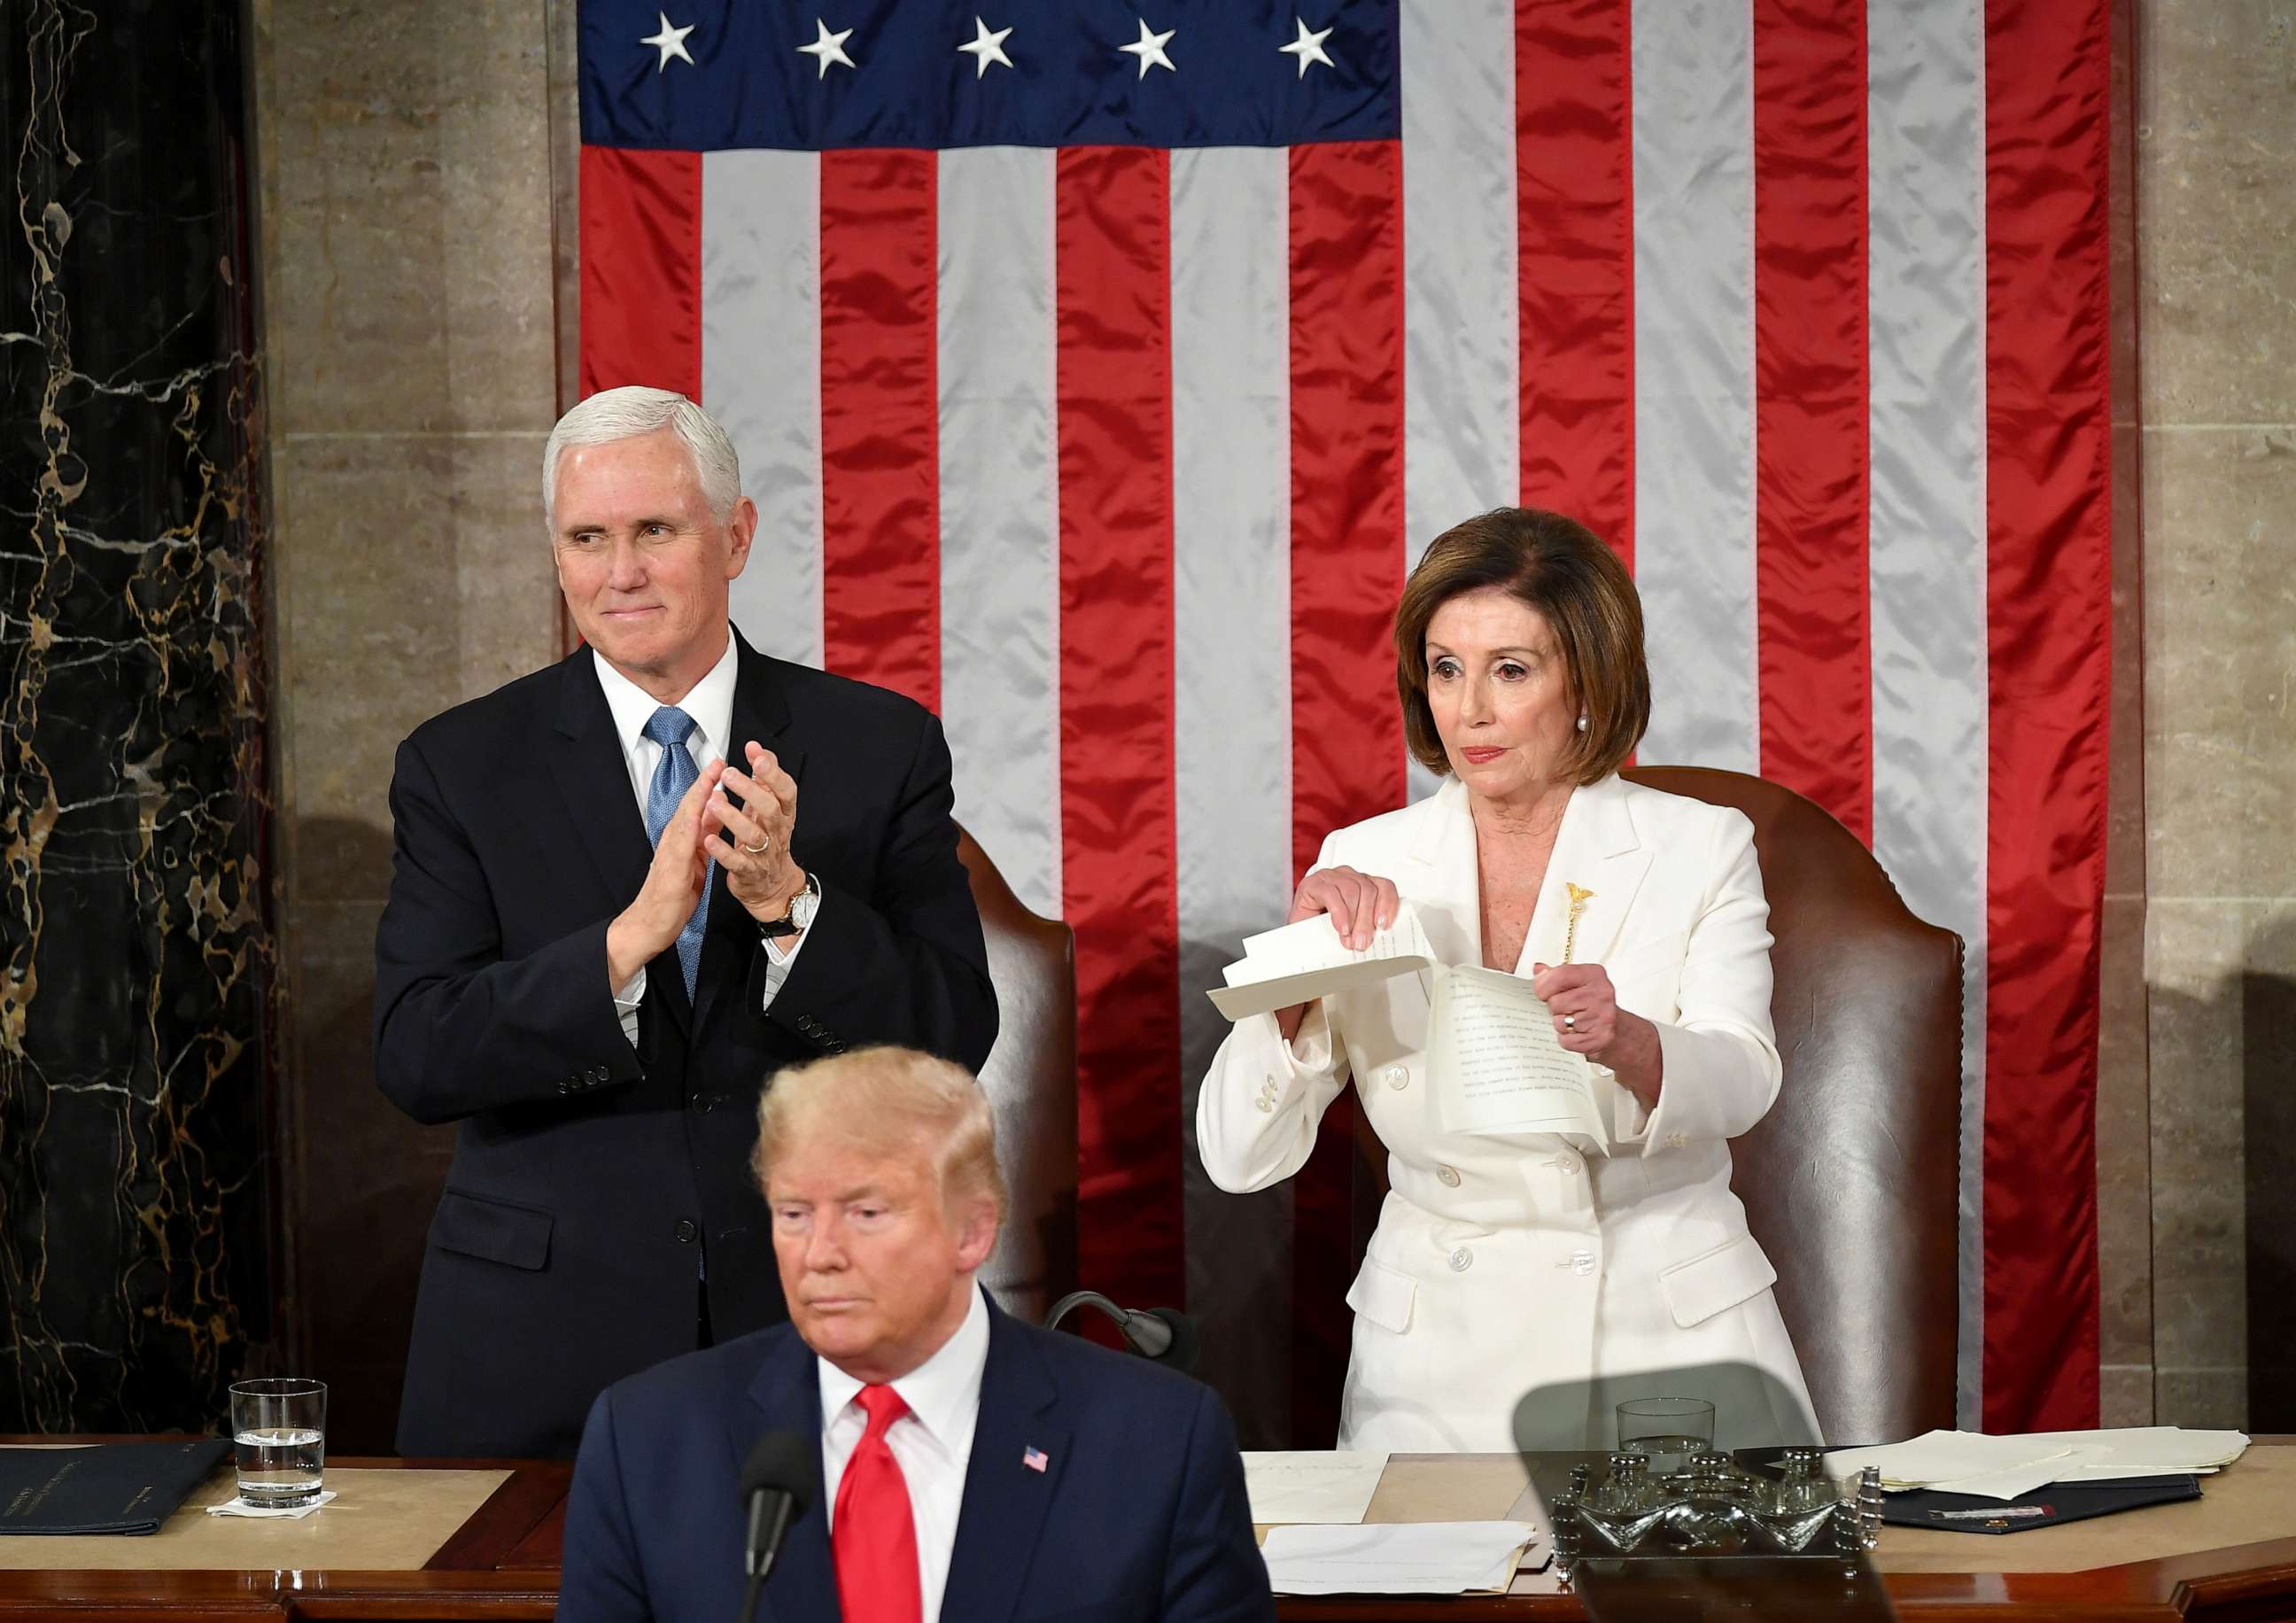 PHOTO: Vice President Mike Pence claps as Speaker of the House of Representatives Nancy Pelosi rips a copy of President Donald Trump's speech after he delivers the State of the Union address in Washington, D.C., Feb. 4, 2020.